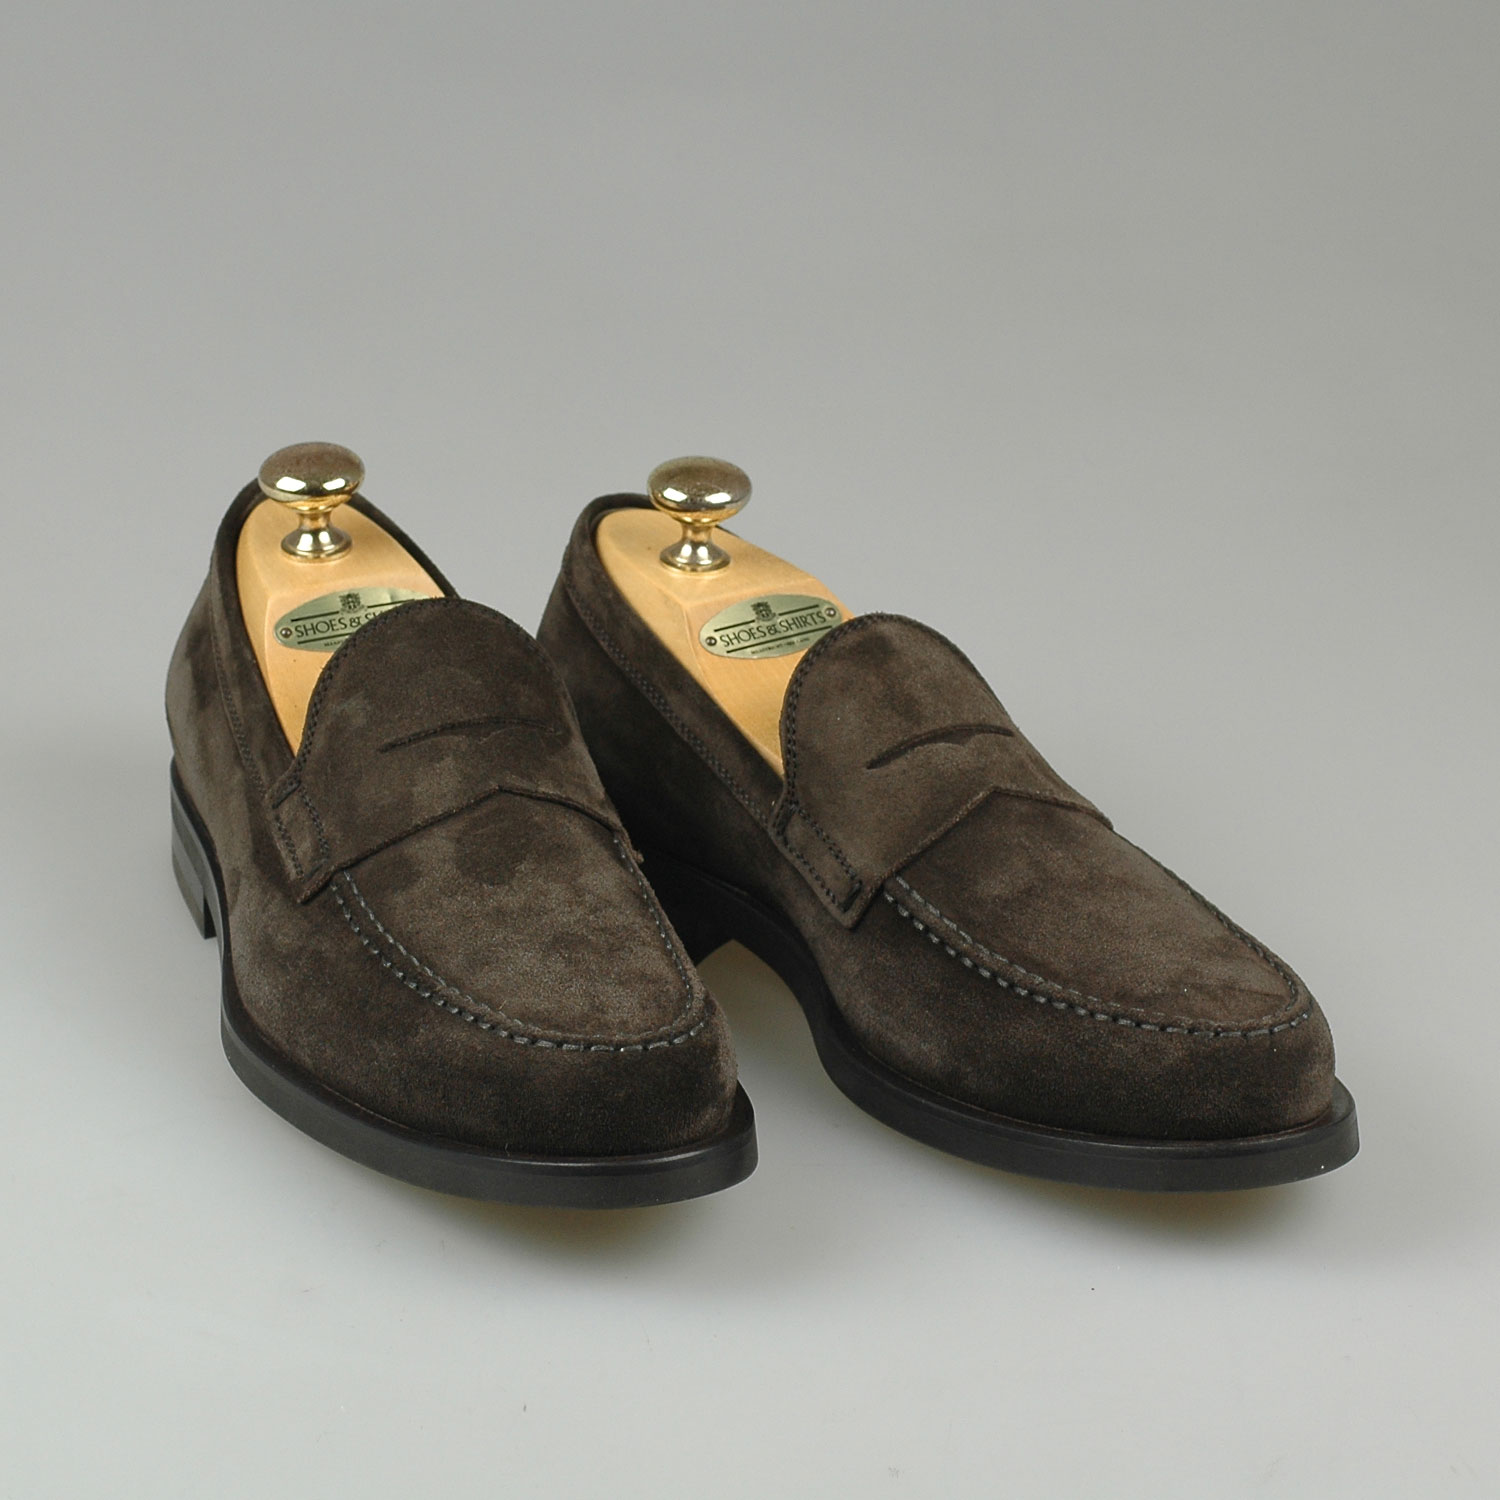 tod's suede loafers